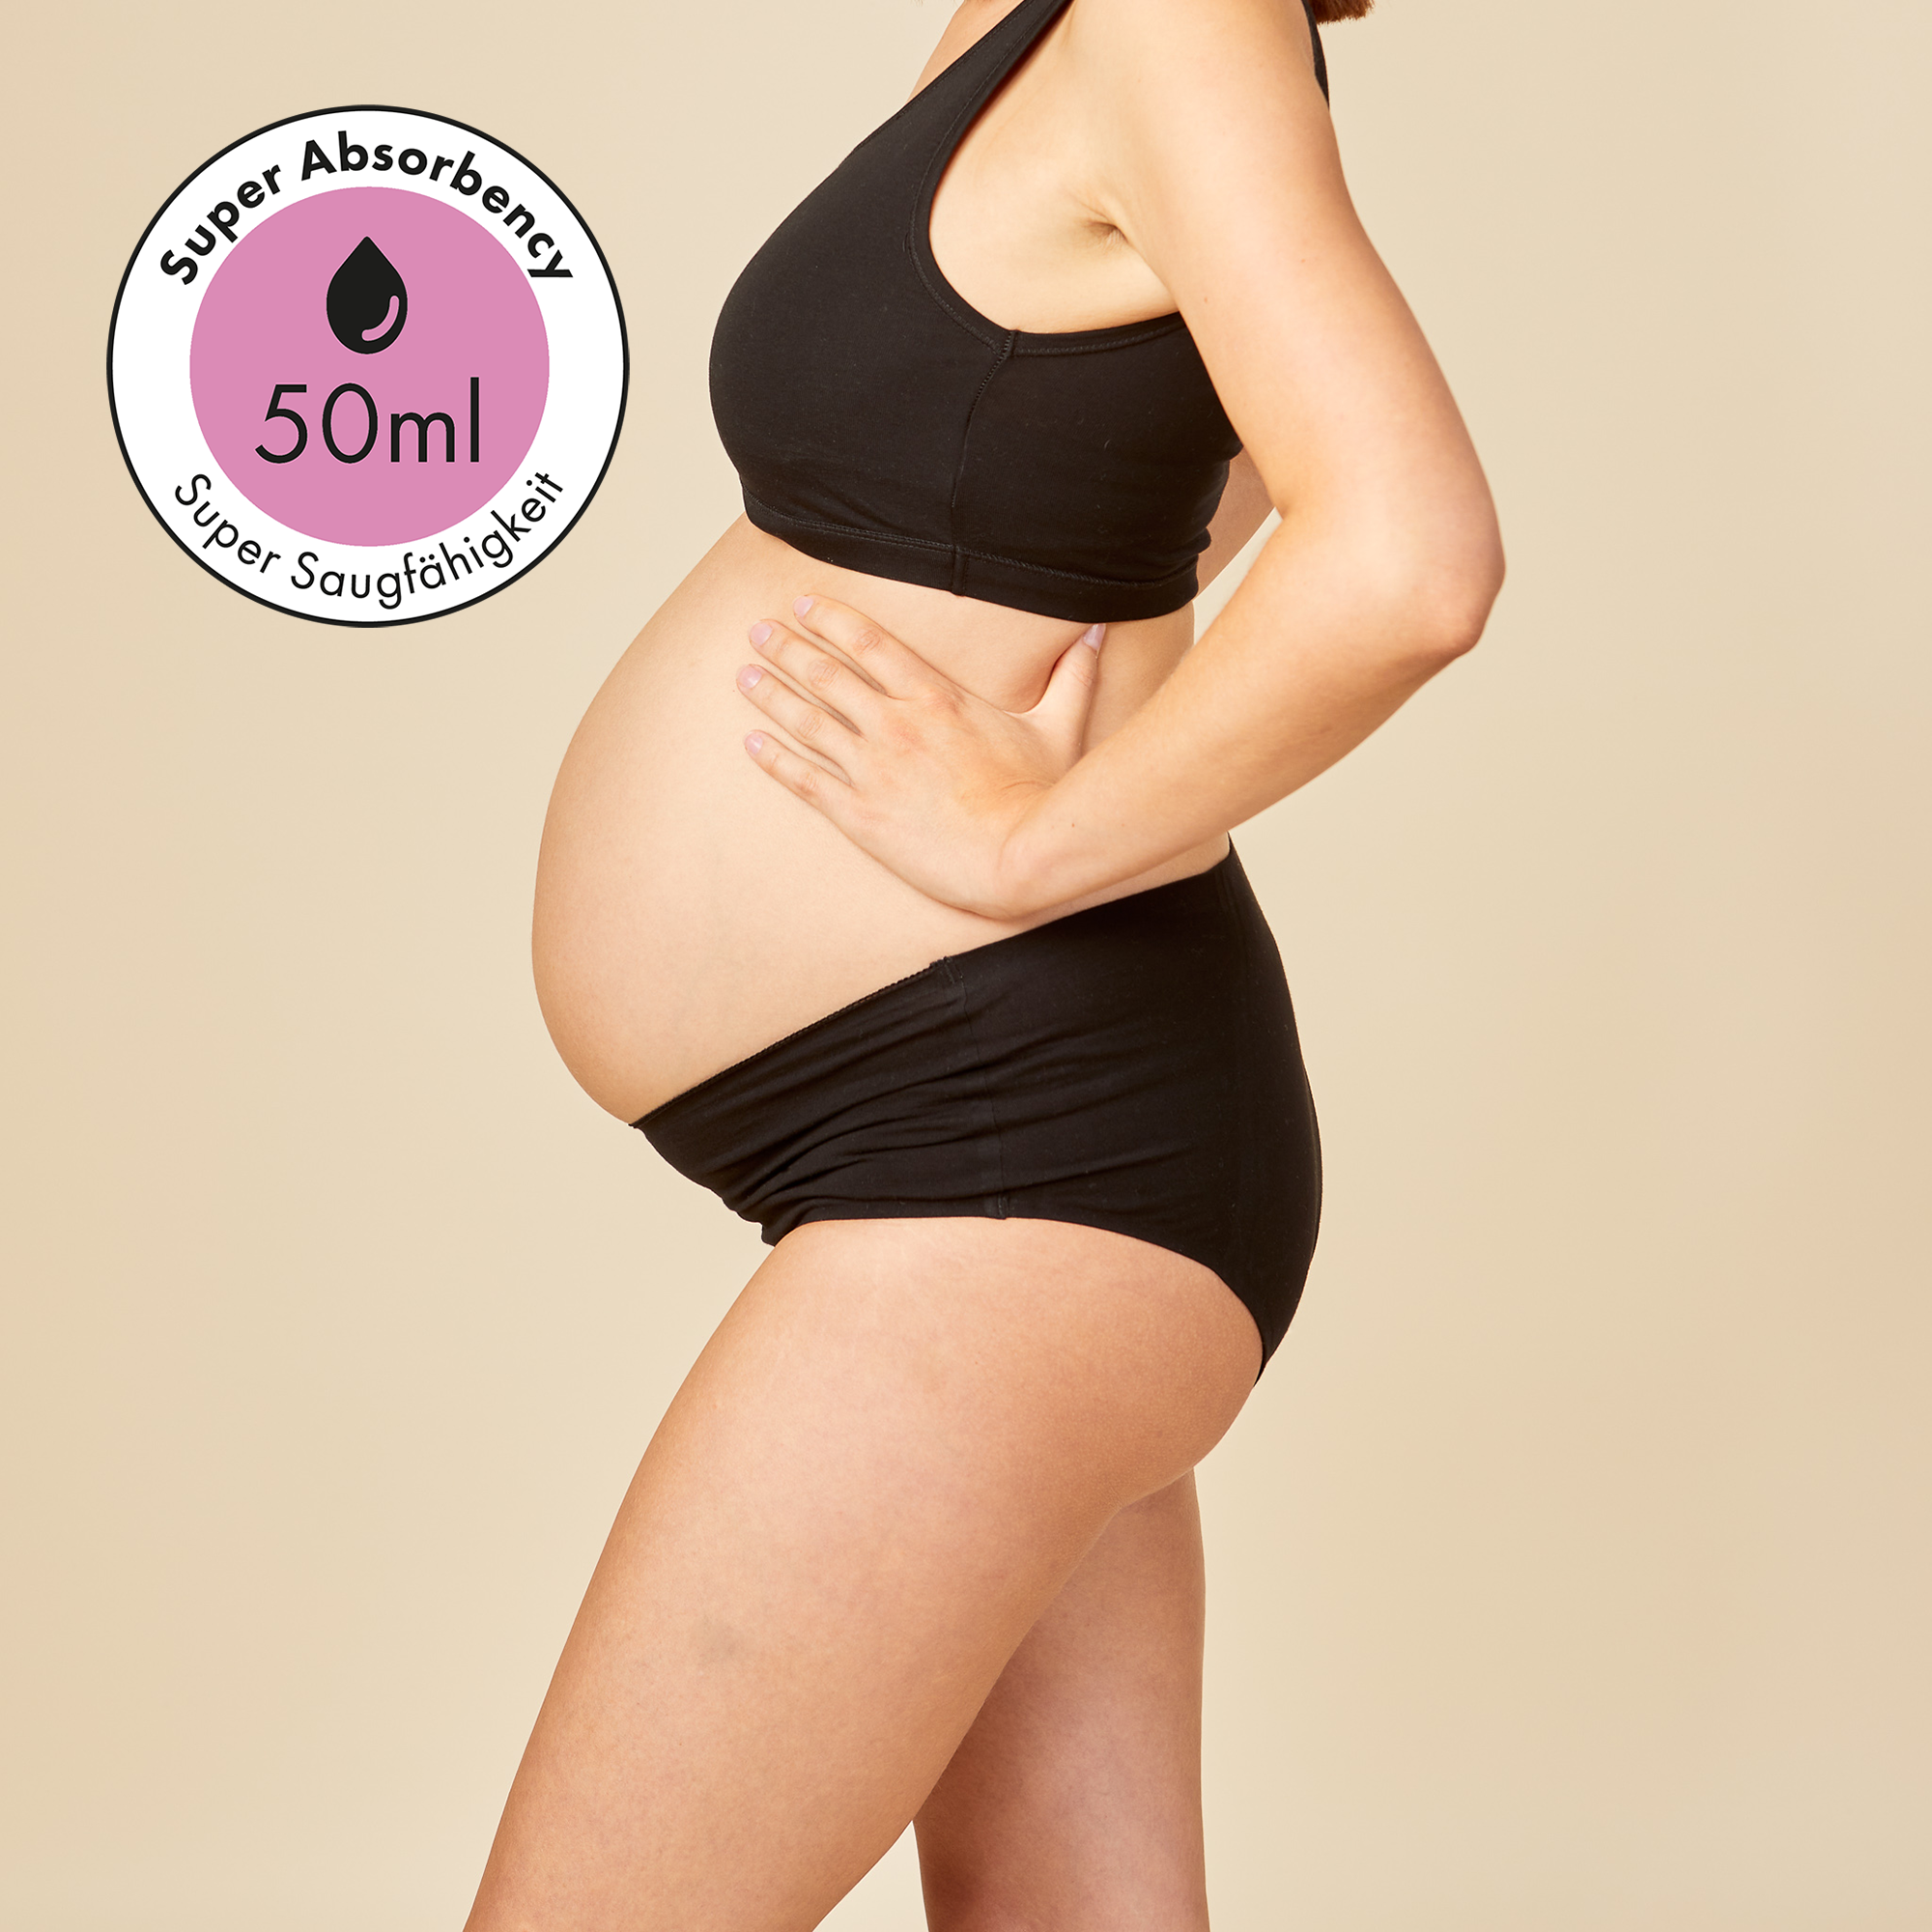 dais maternity absorbent washable underwear modelled by a pregnant woman from the side. The underwear is black and made of organic cotton, and is super absorbent up to 50ml of liquids. 